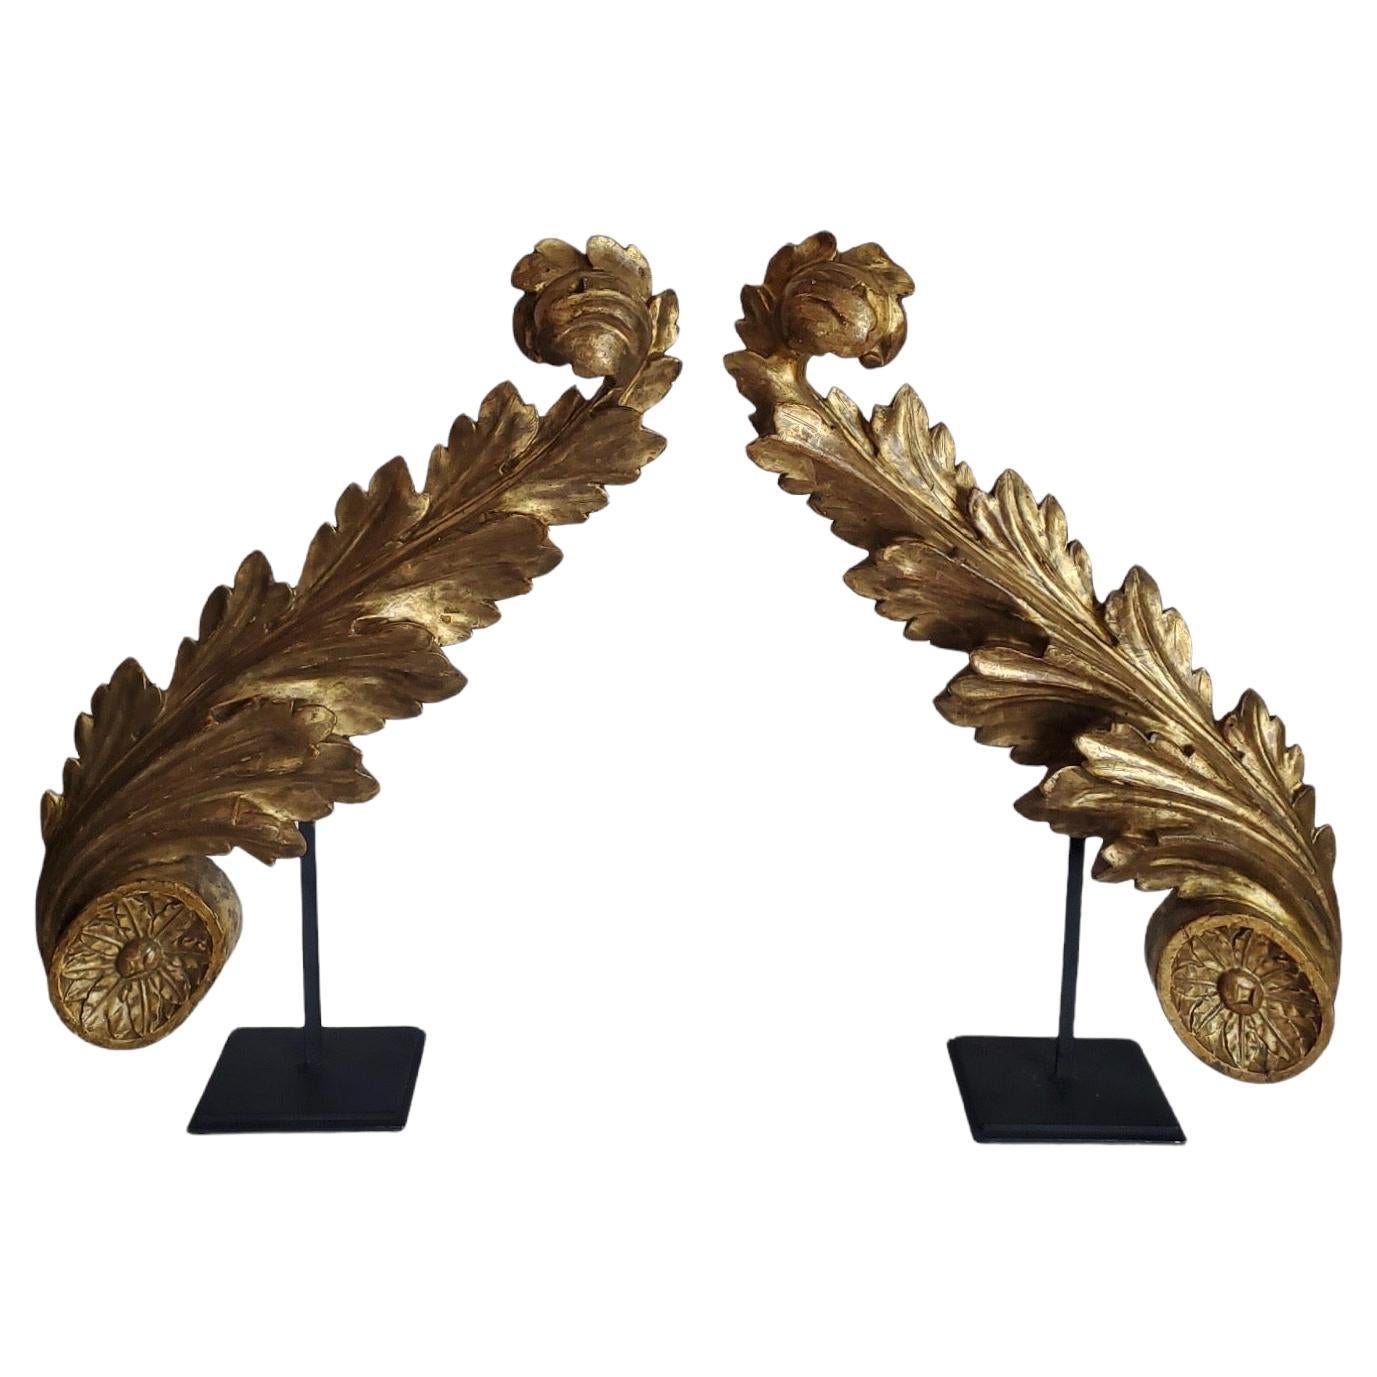 Pair of 18th Century Italian Mounted Giltwood Fragments